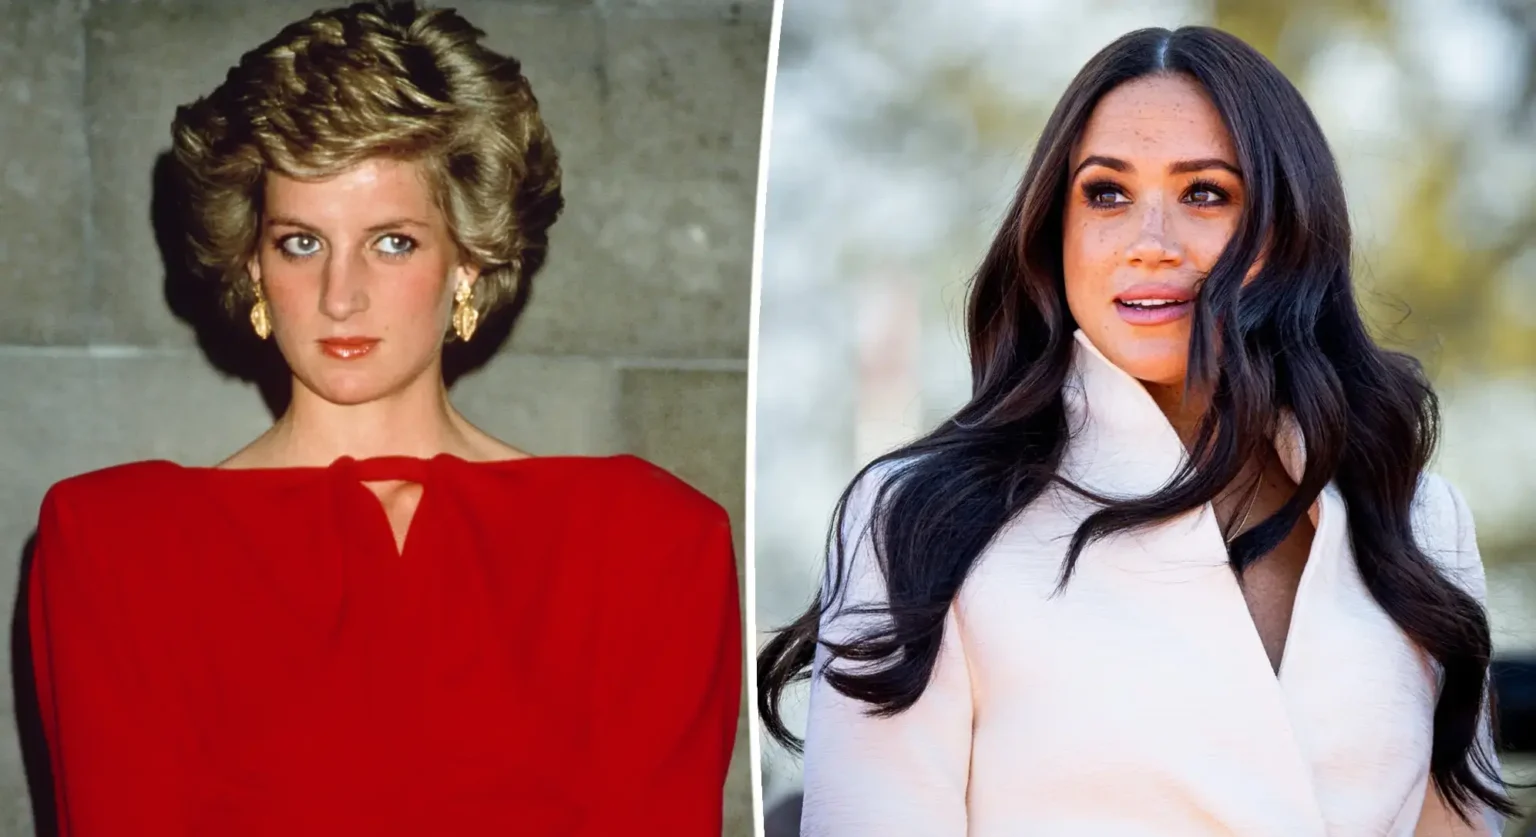 prince-william-seems-unhappy-after-meghan-markle-compared-to-the-late-princess-diana